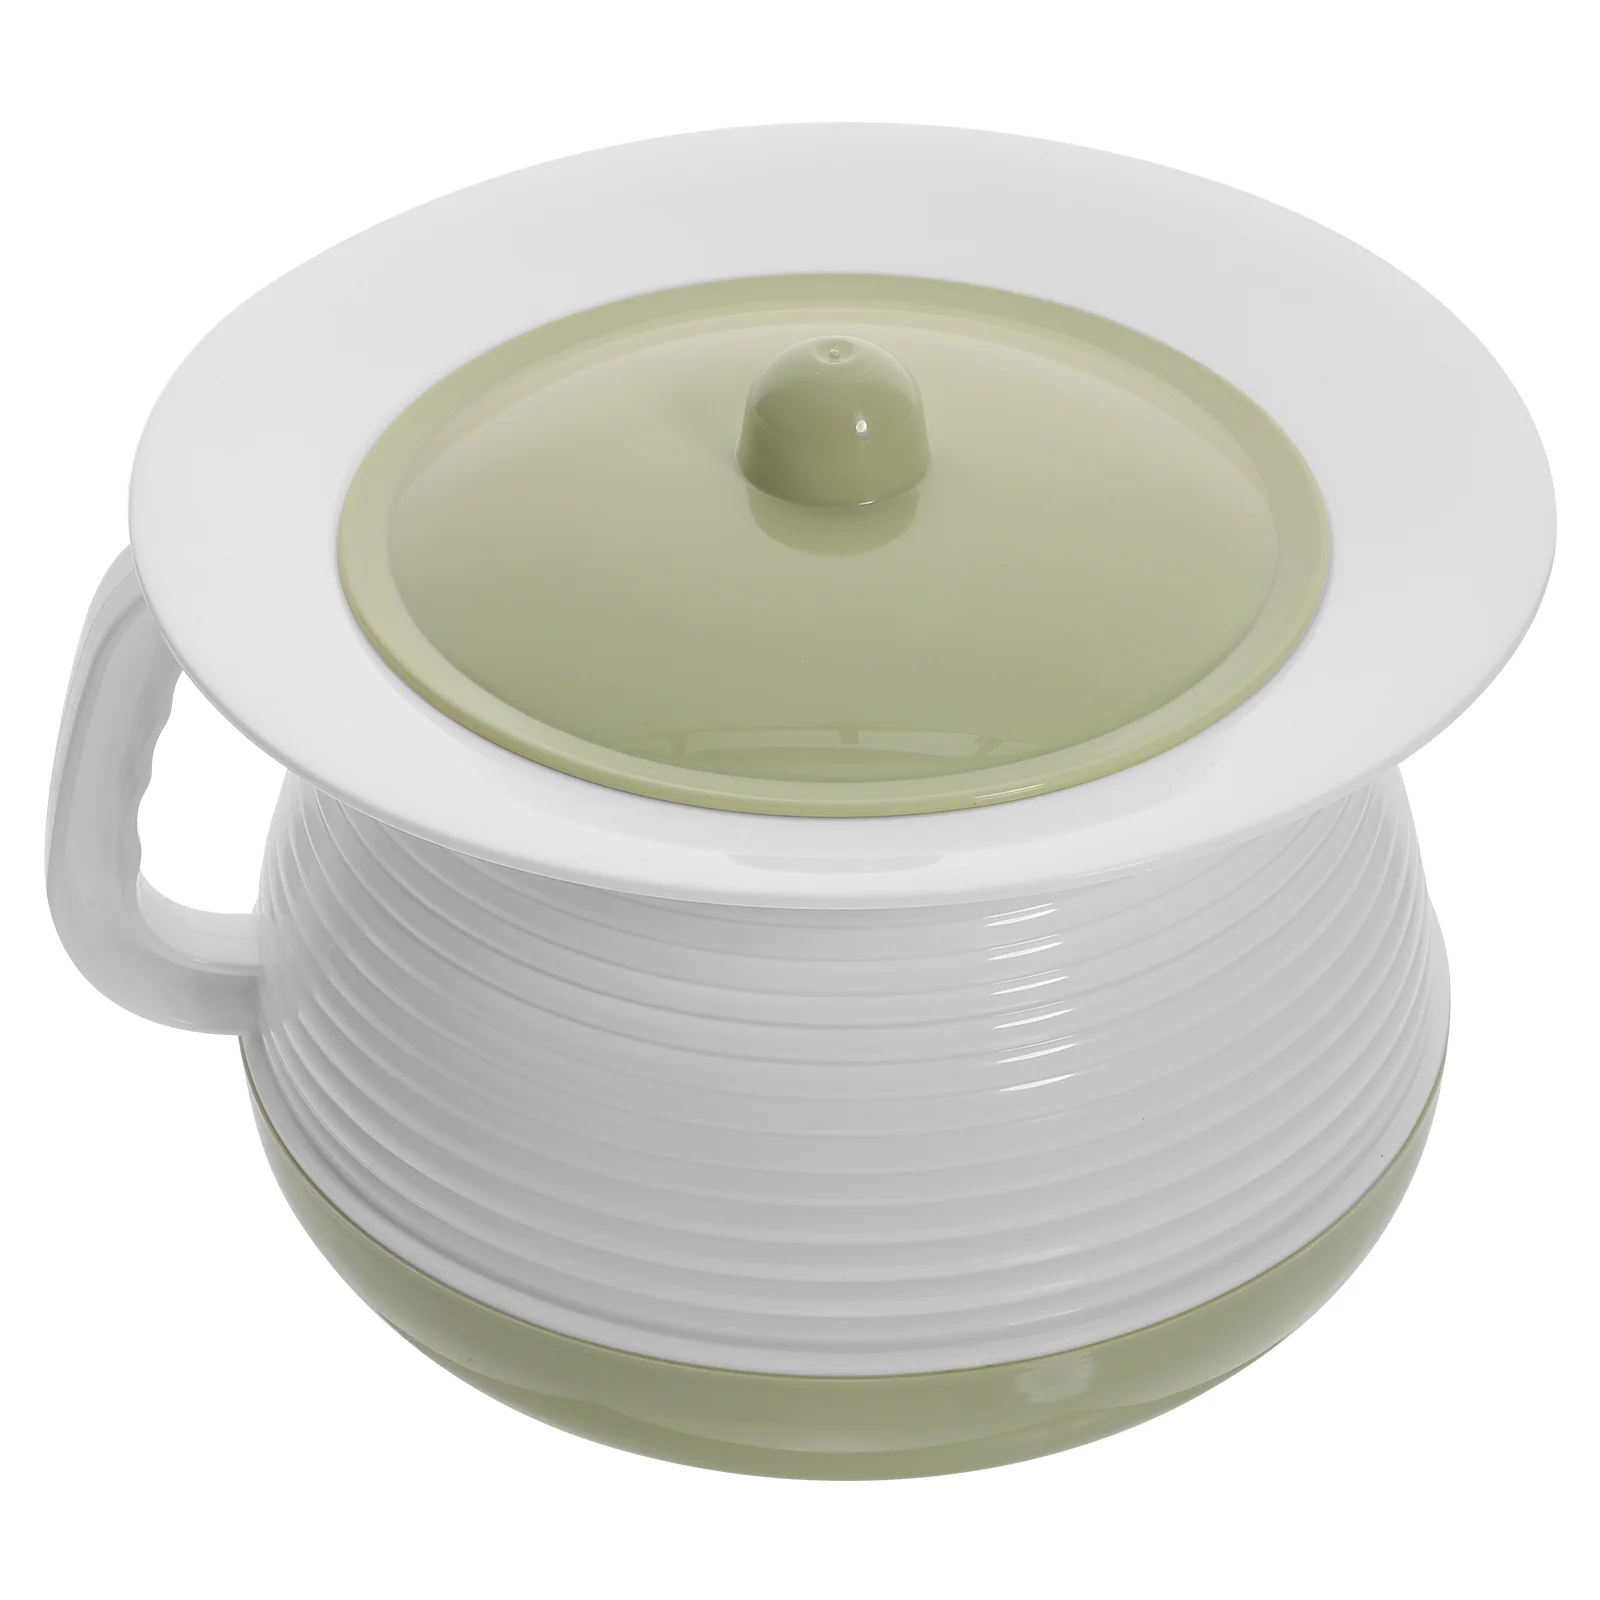 

Spittoon Bedpan Urinal Pot Chamber Cover Kids Travel Potty Aldult Basin Piss Plastic Adult Pail Portable